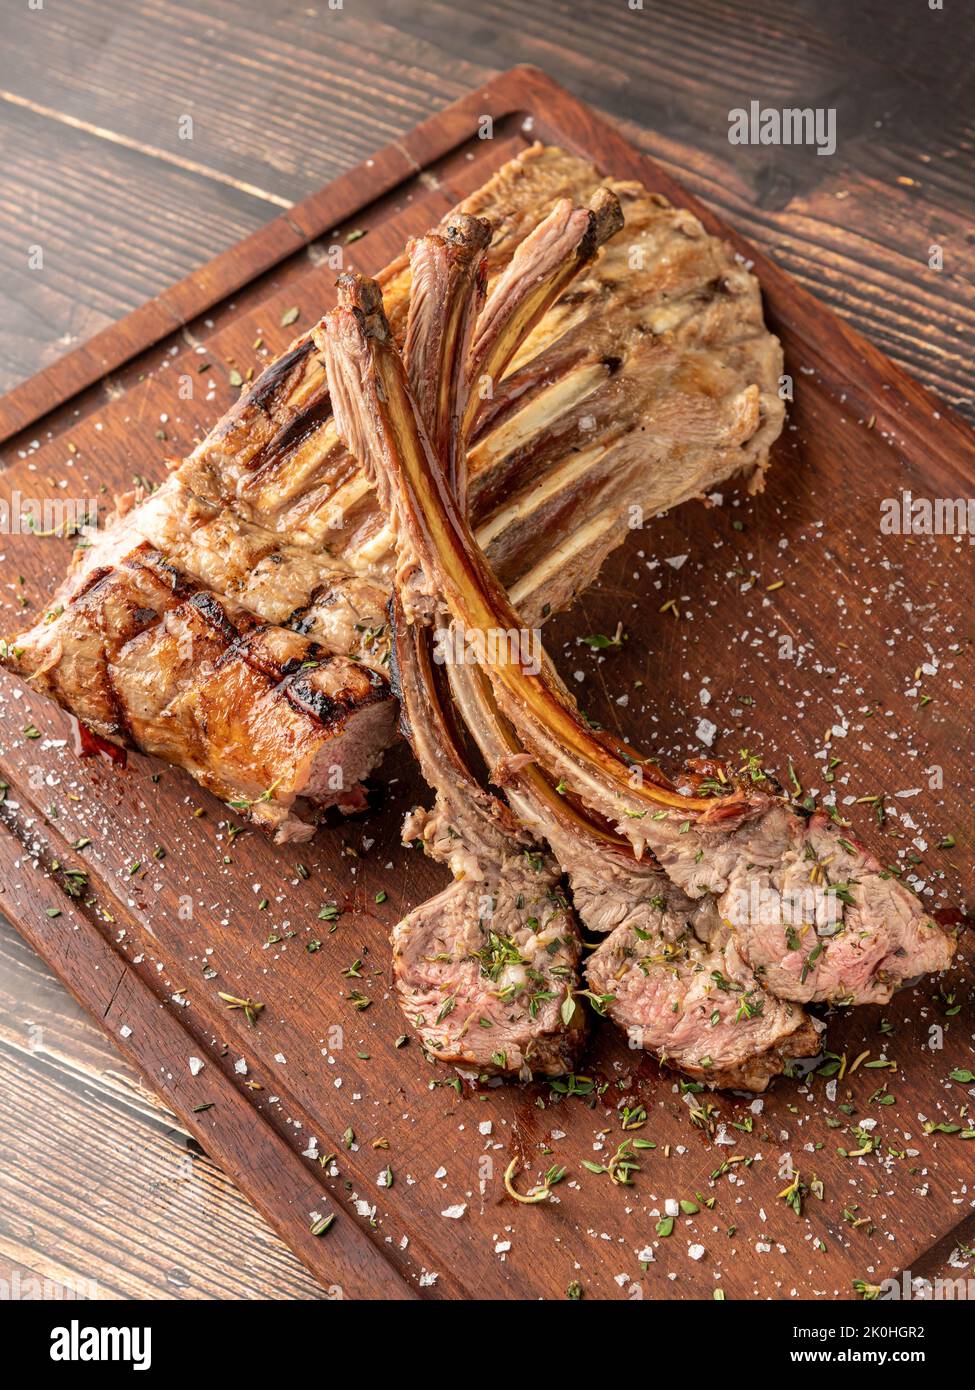 Grilled lamb chops on a wooden serving plate Stock Photo